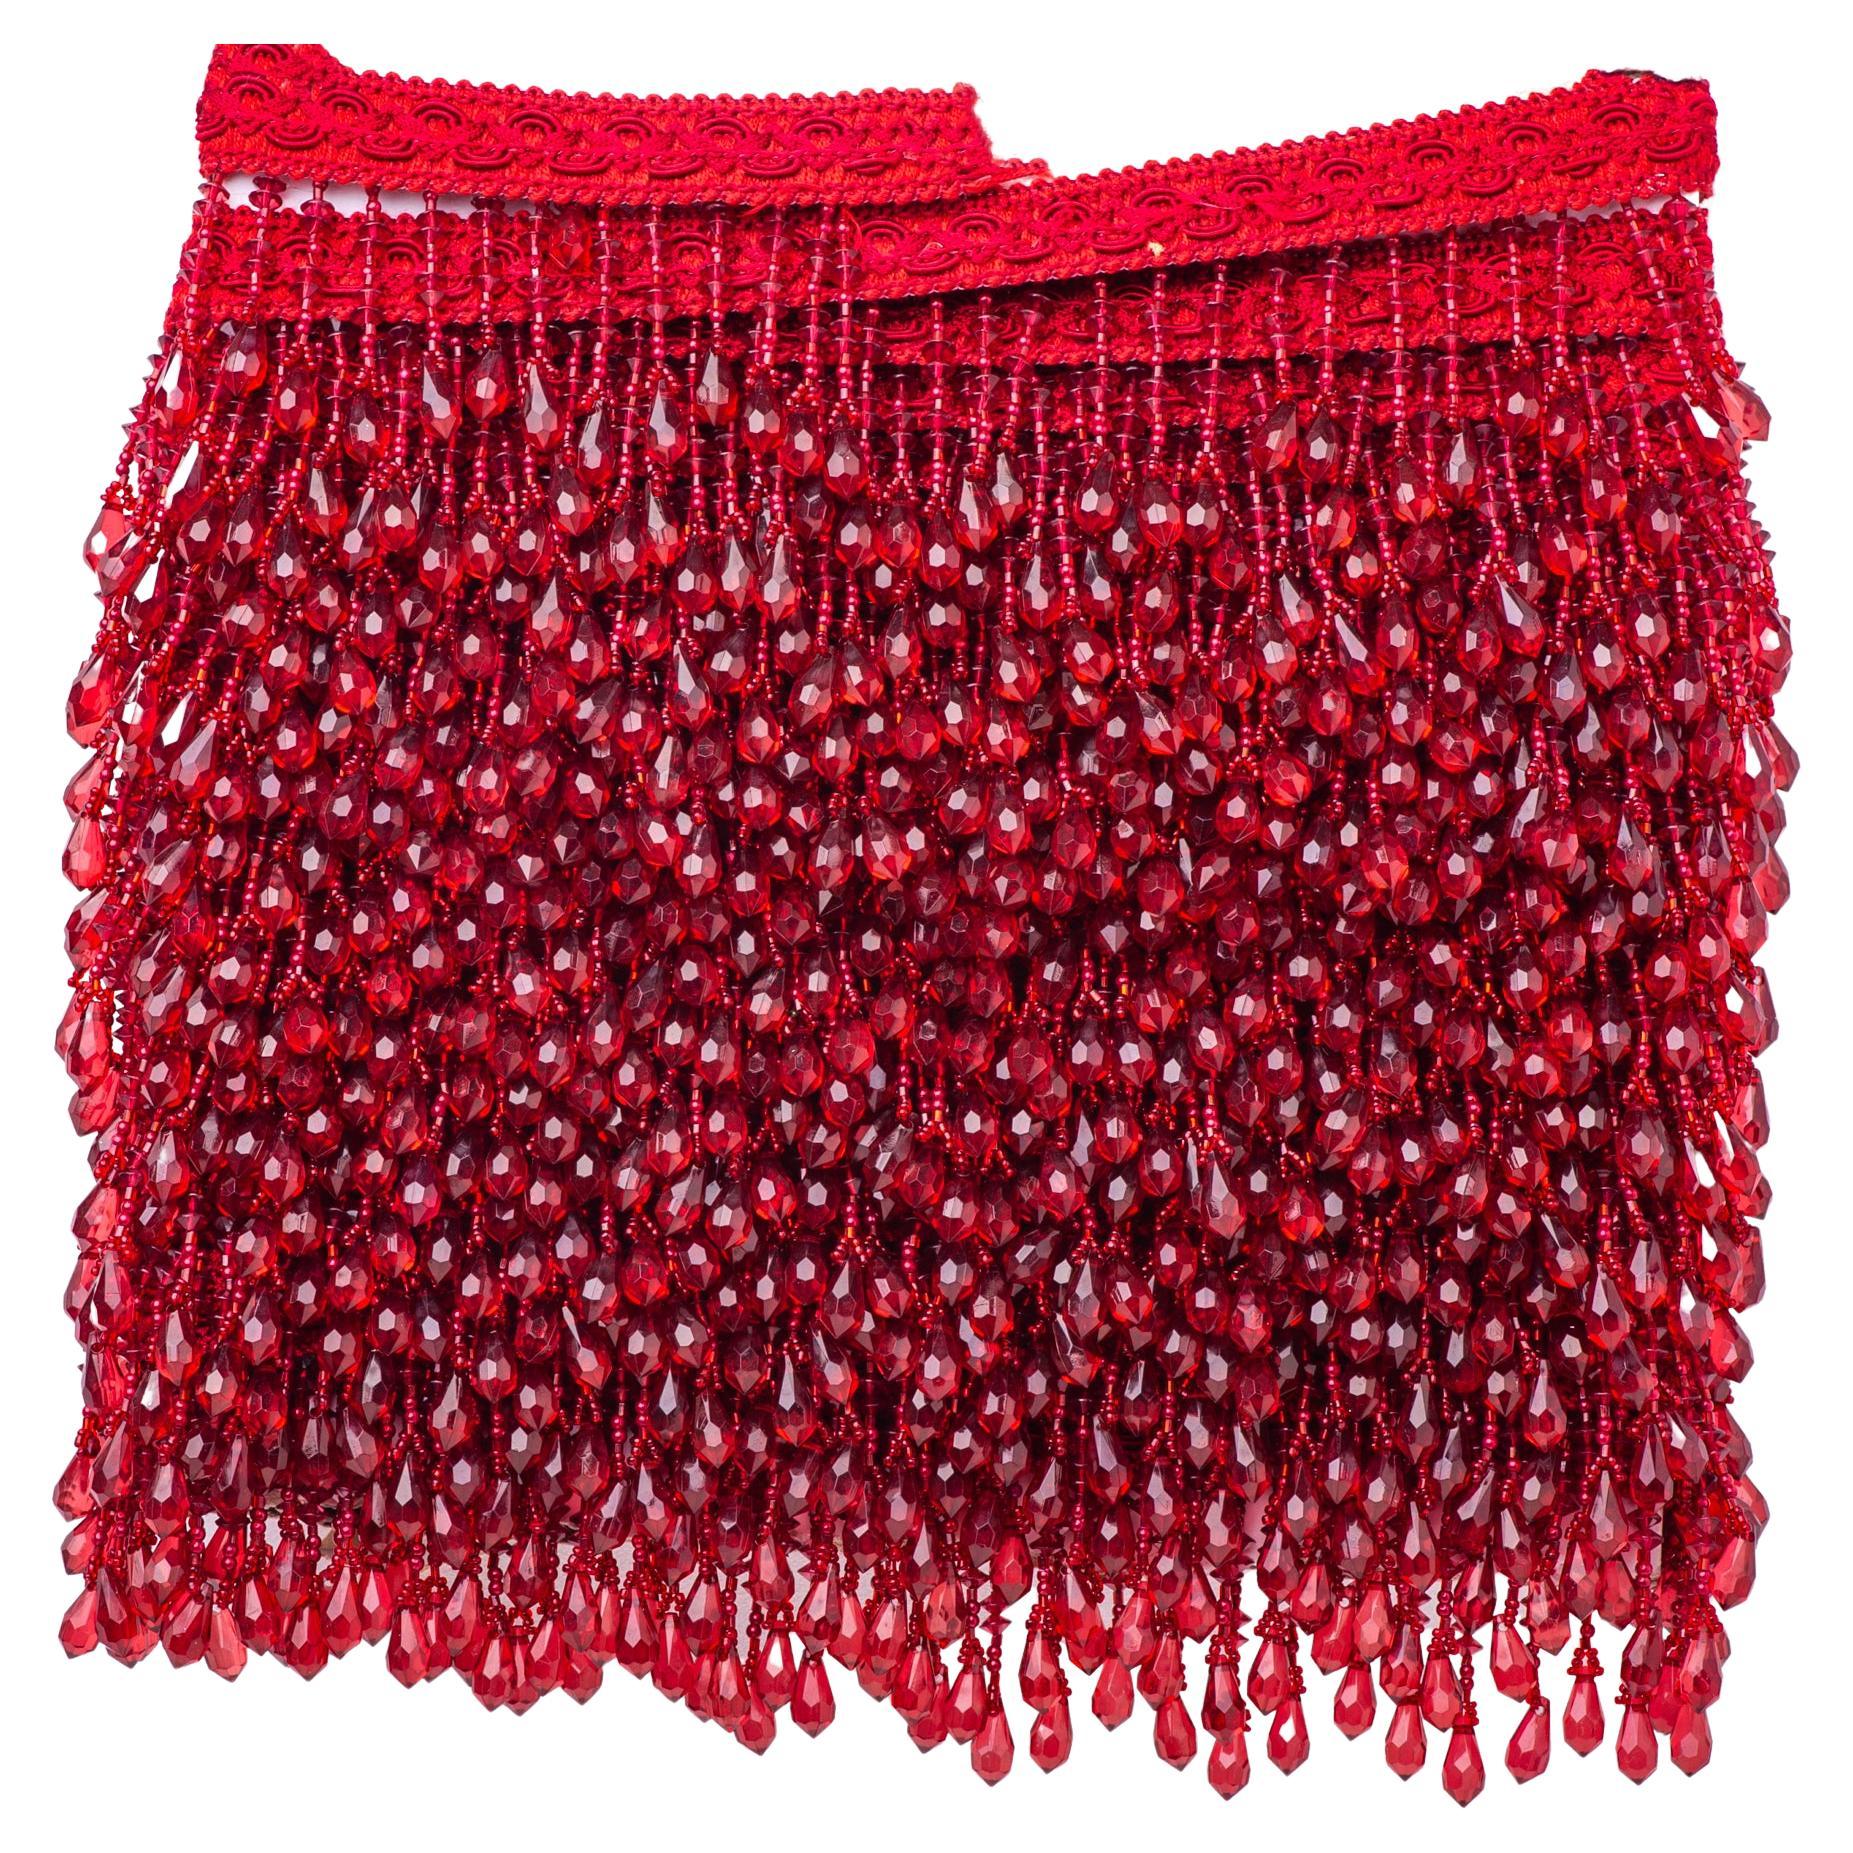 Interesting red border or fringe with pendants: wonderful for tents, table-cover, bedspread or any other idea.